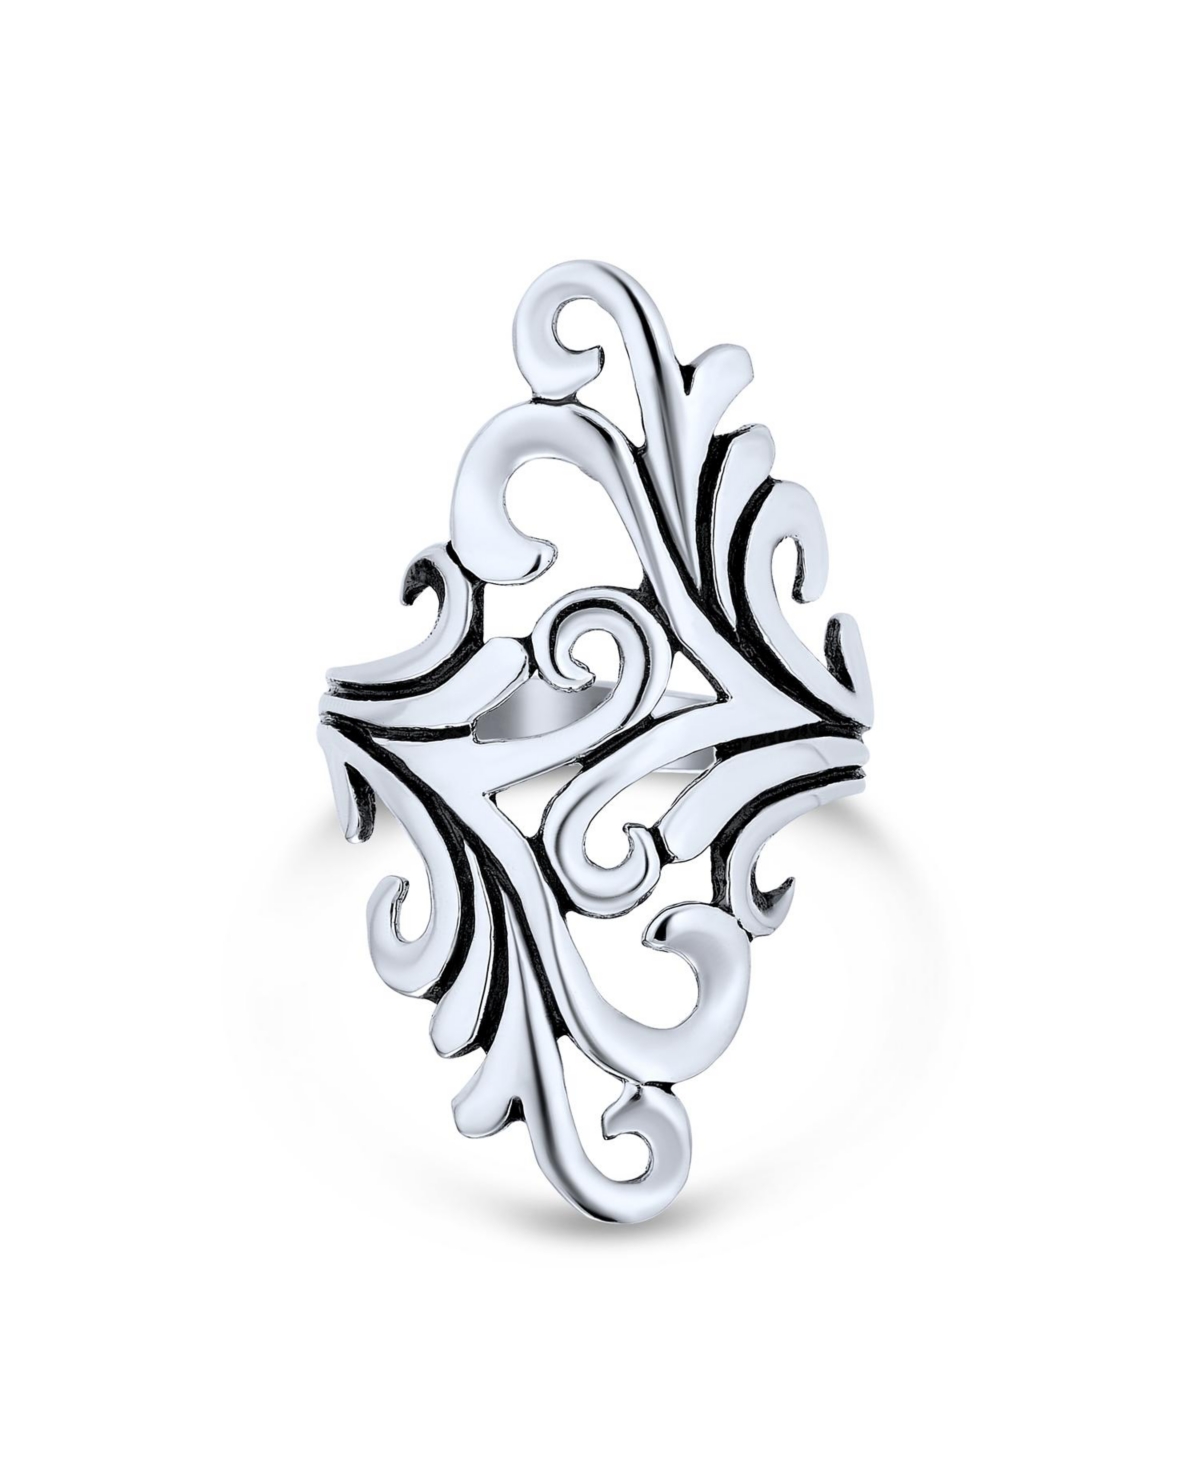 Nature Swirl Leaf Vine Wrap Bypass Full Finger Armor Statement Ring Western Jewelry Oxidized .925 Sterling Silver - Silver